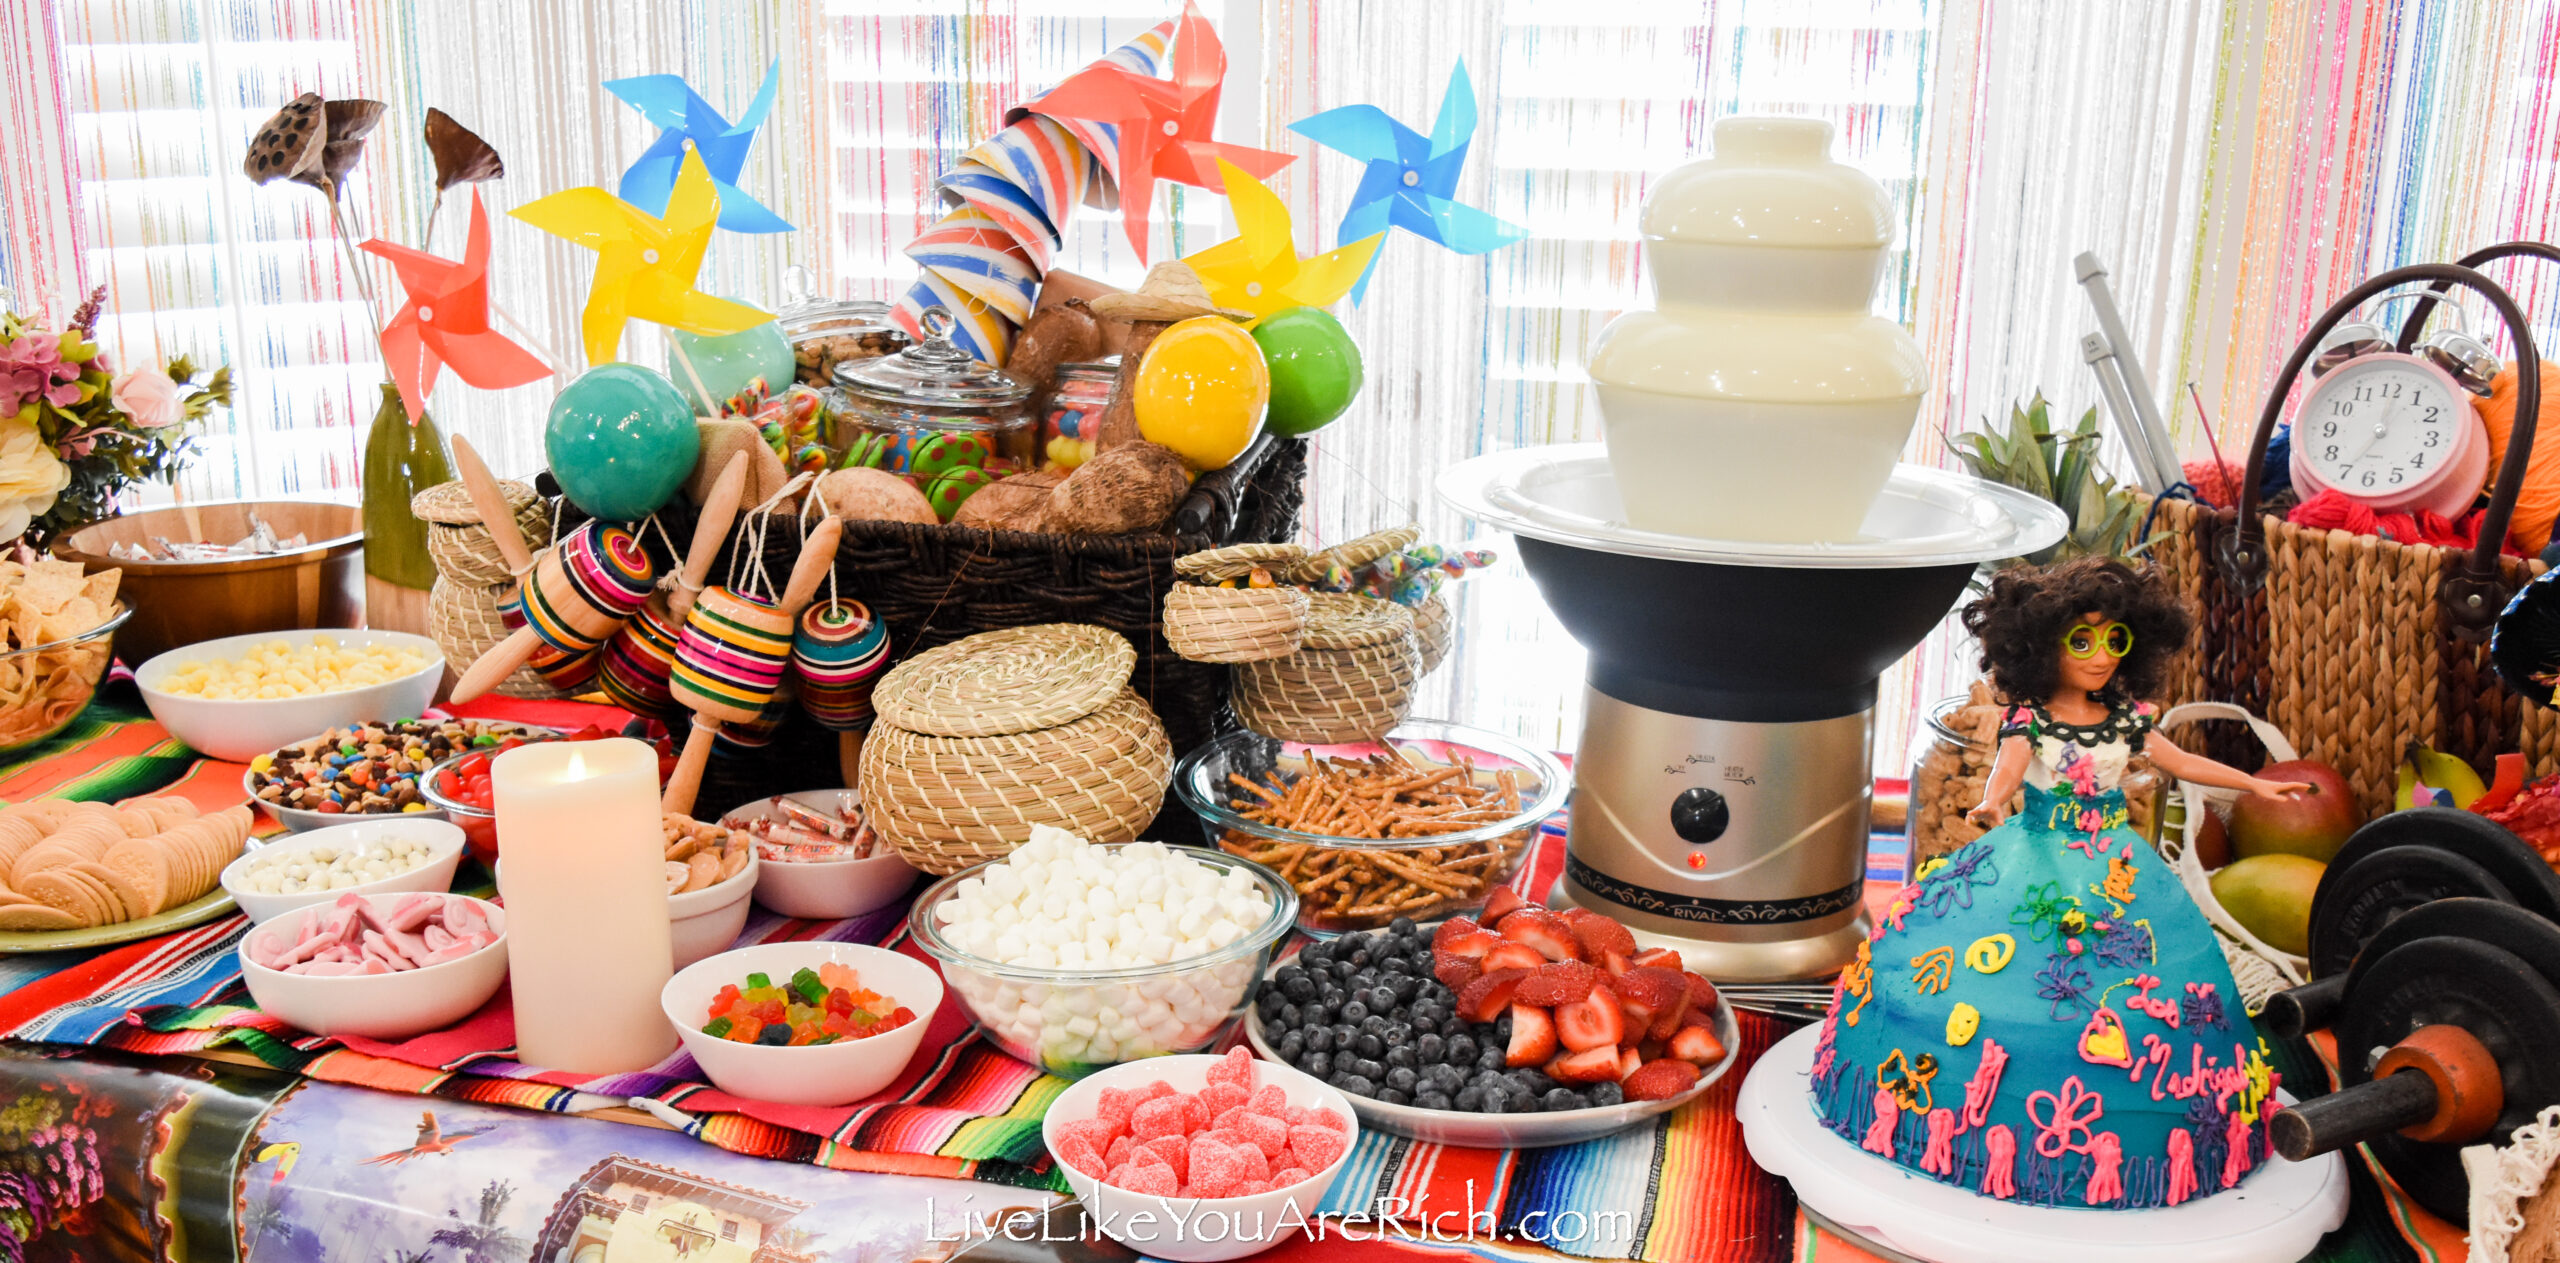 Encanto birthday party activities food table